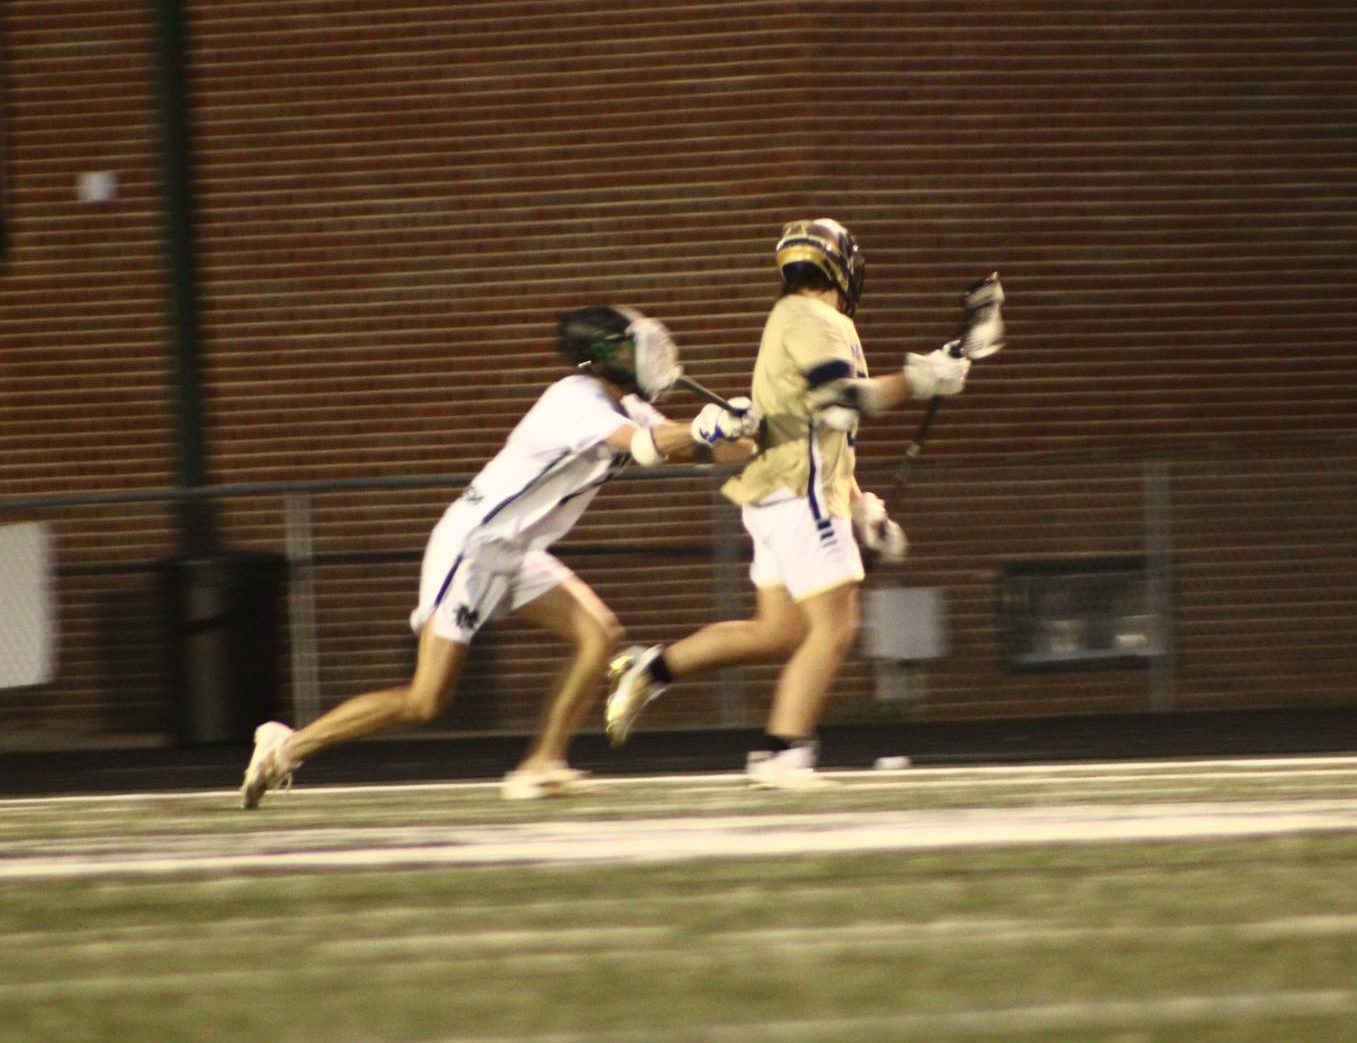 The Varsity Boys LAX during a game.
Photo provided by the Legend Yearbook staff.